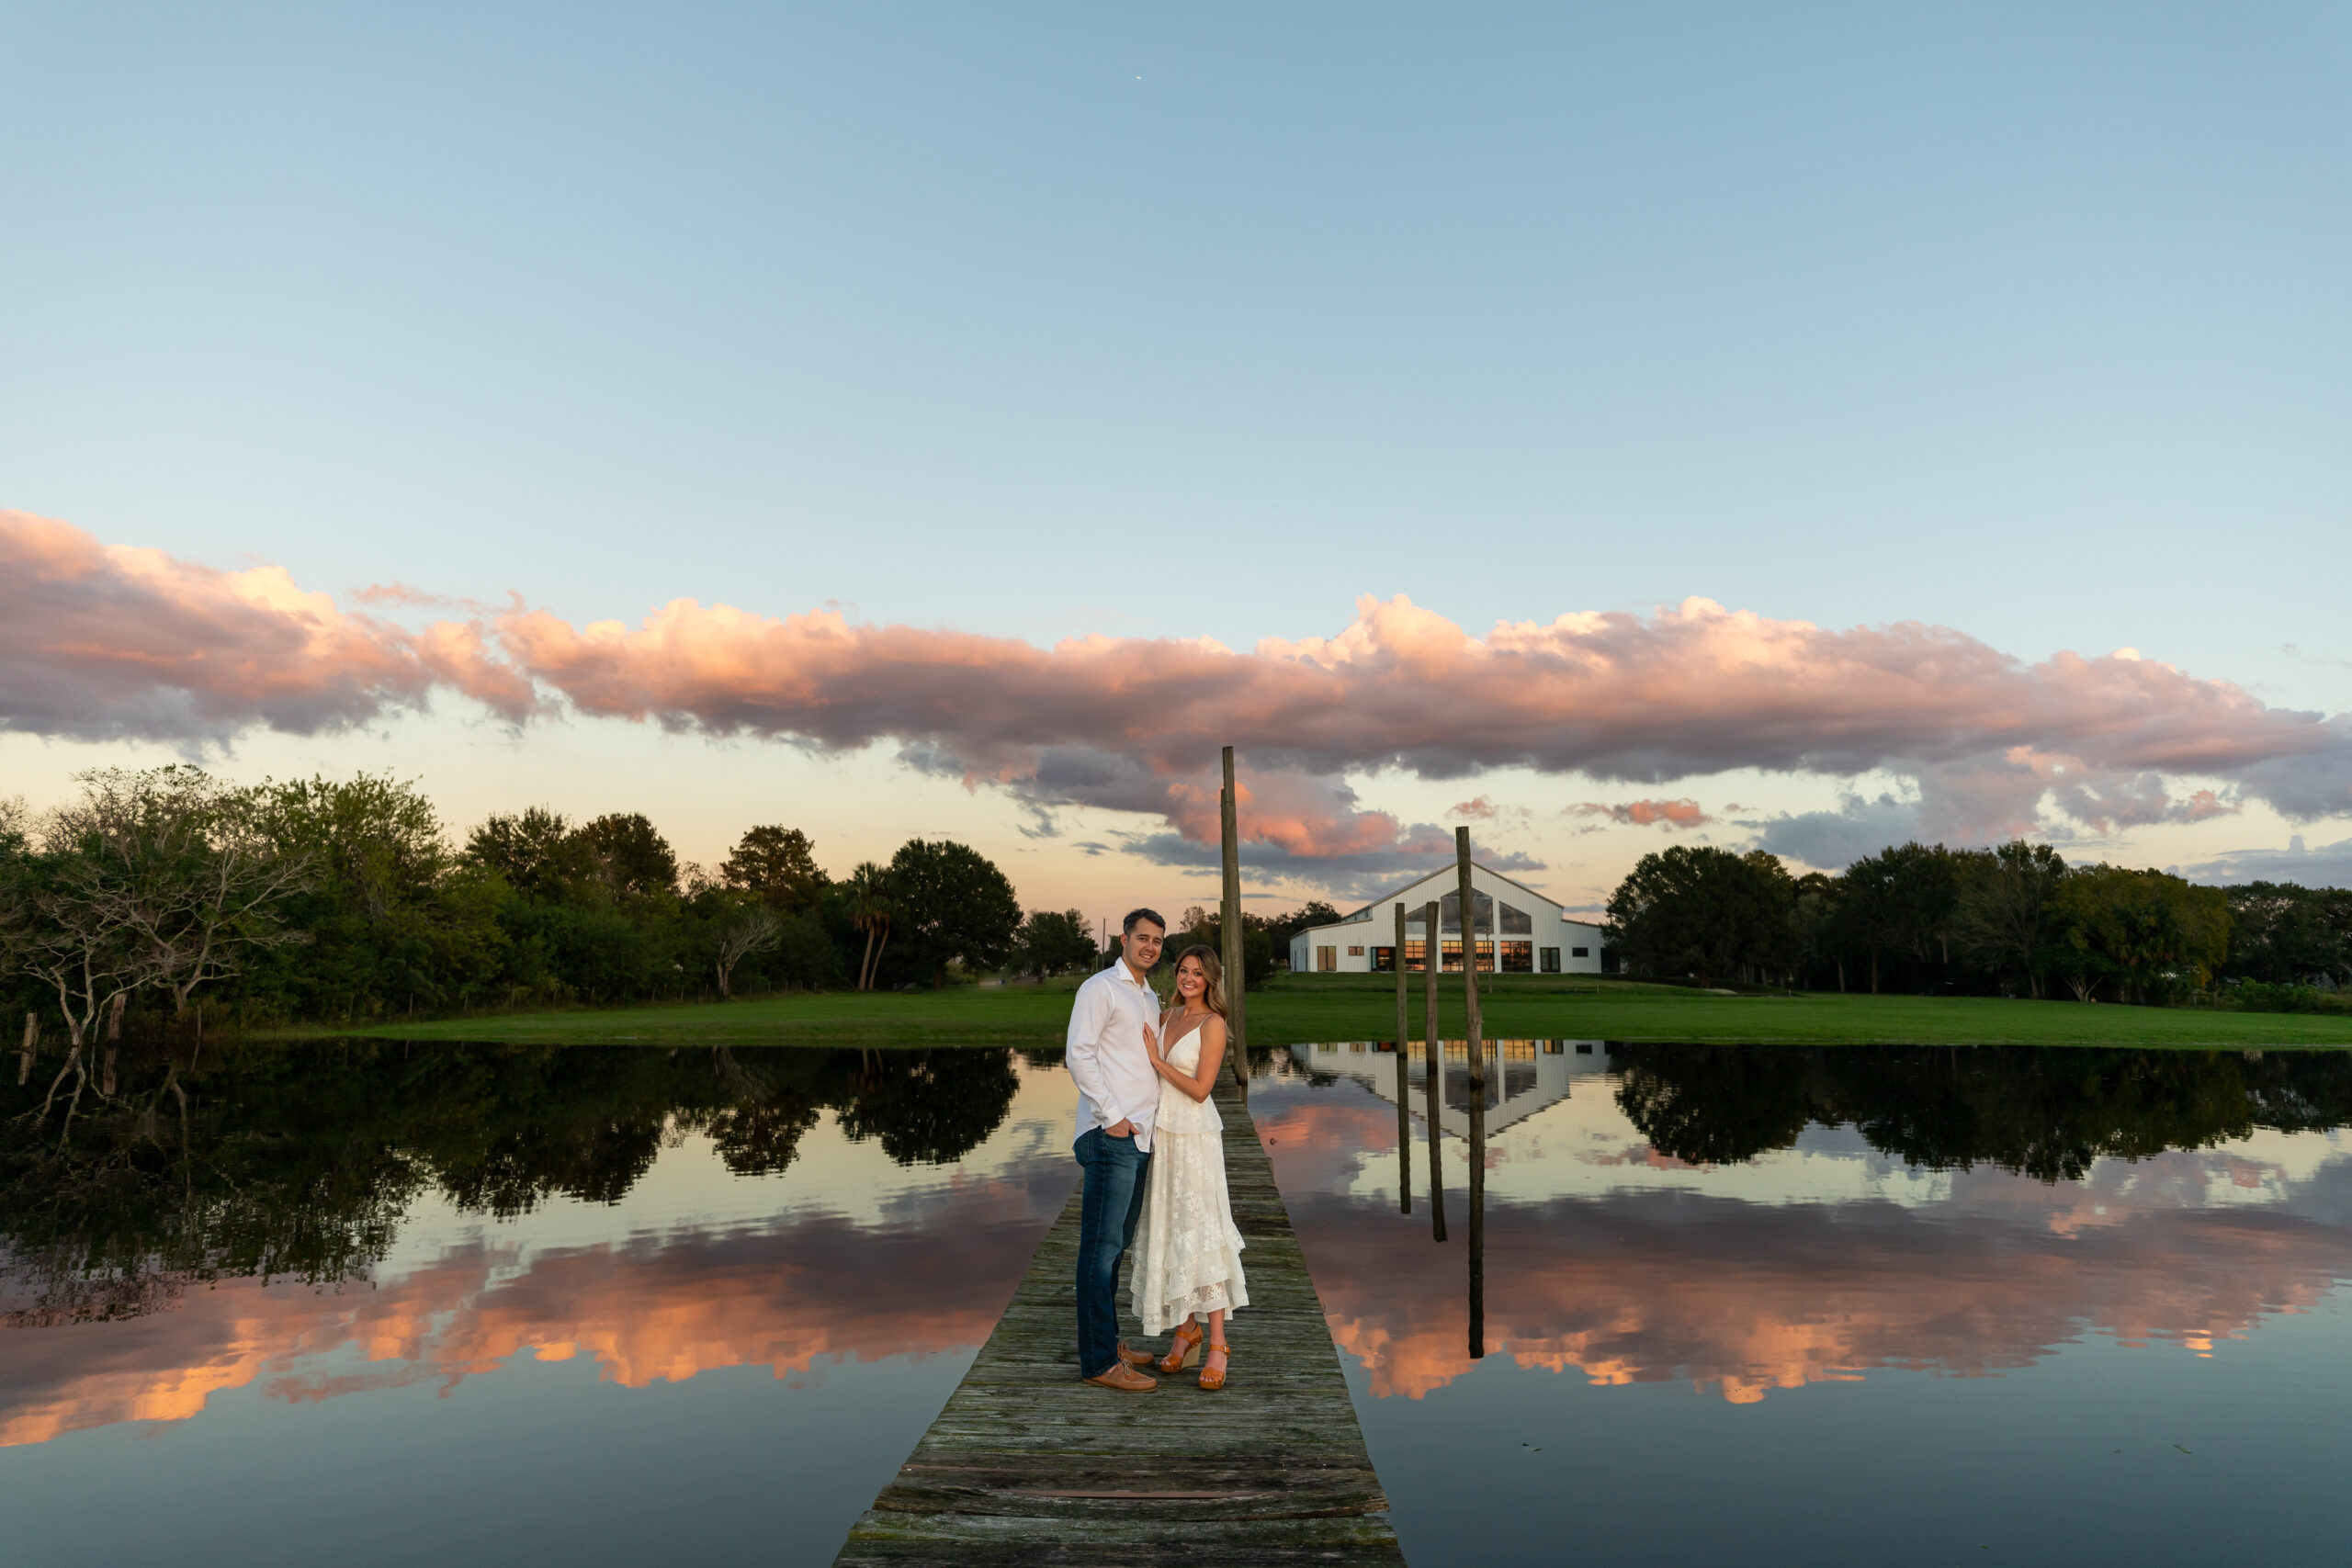 Man and woman standing on a dock on Lake Toho with wedding venue in the background and clouds and sunset reflecting in the water.